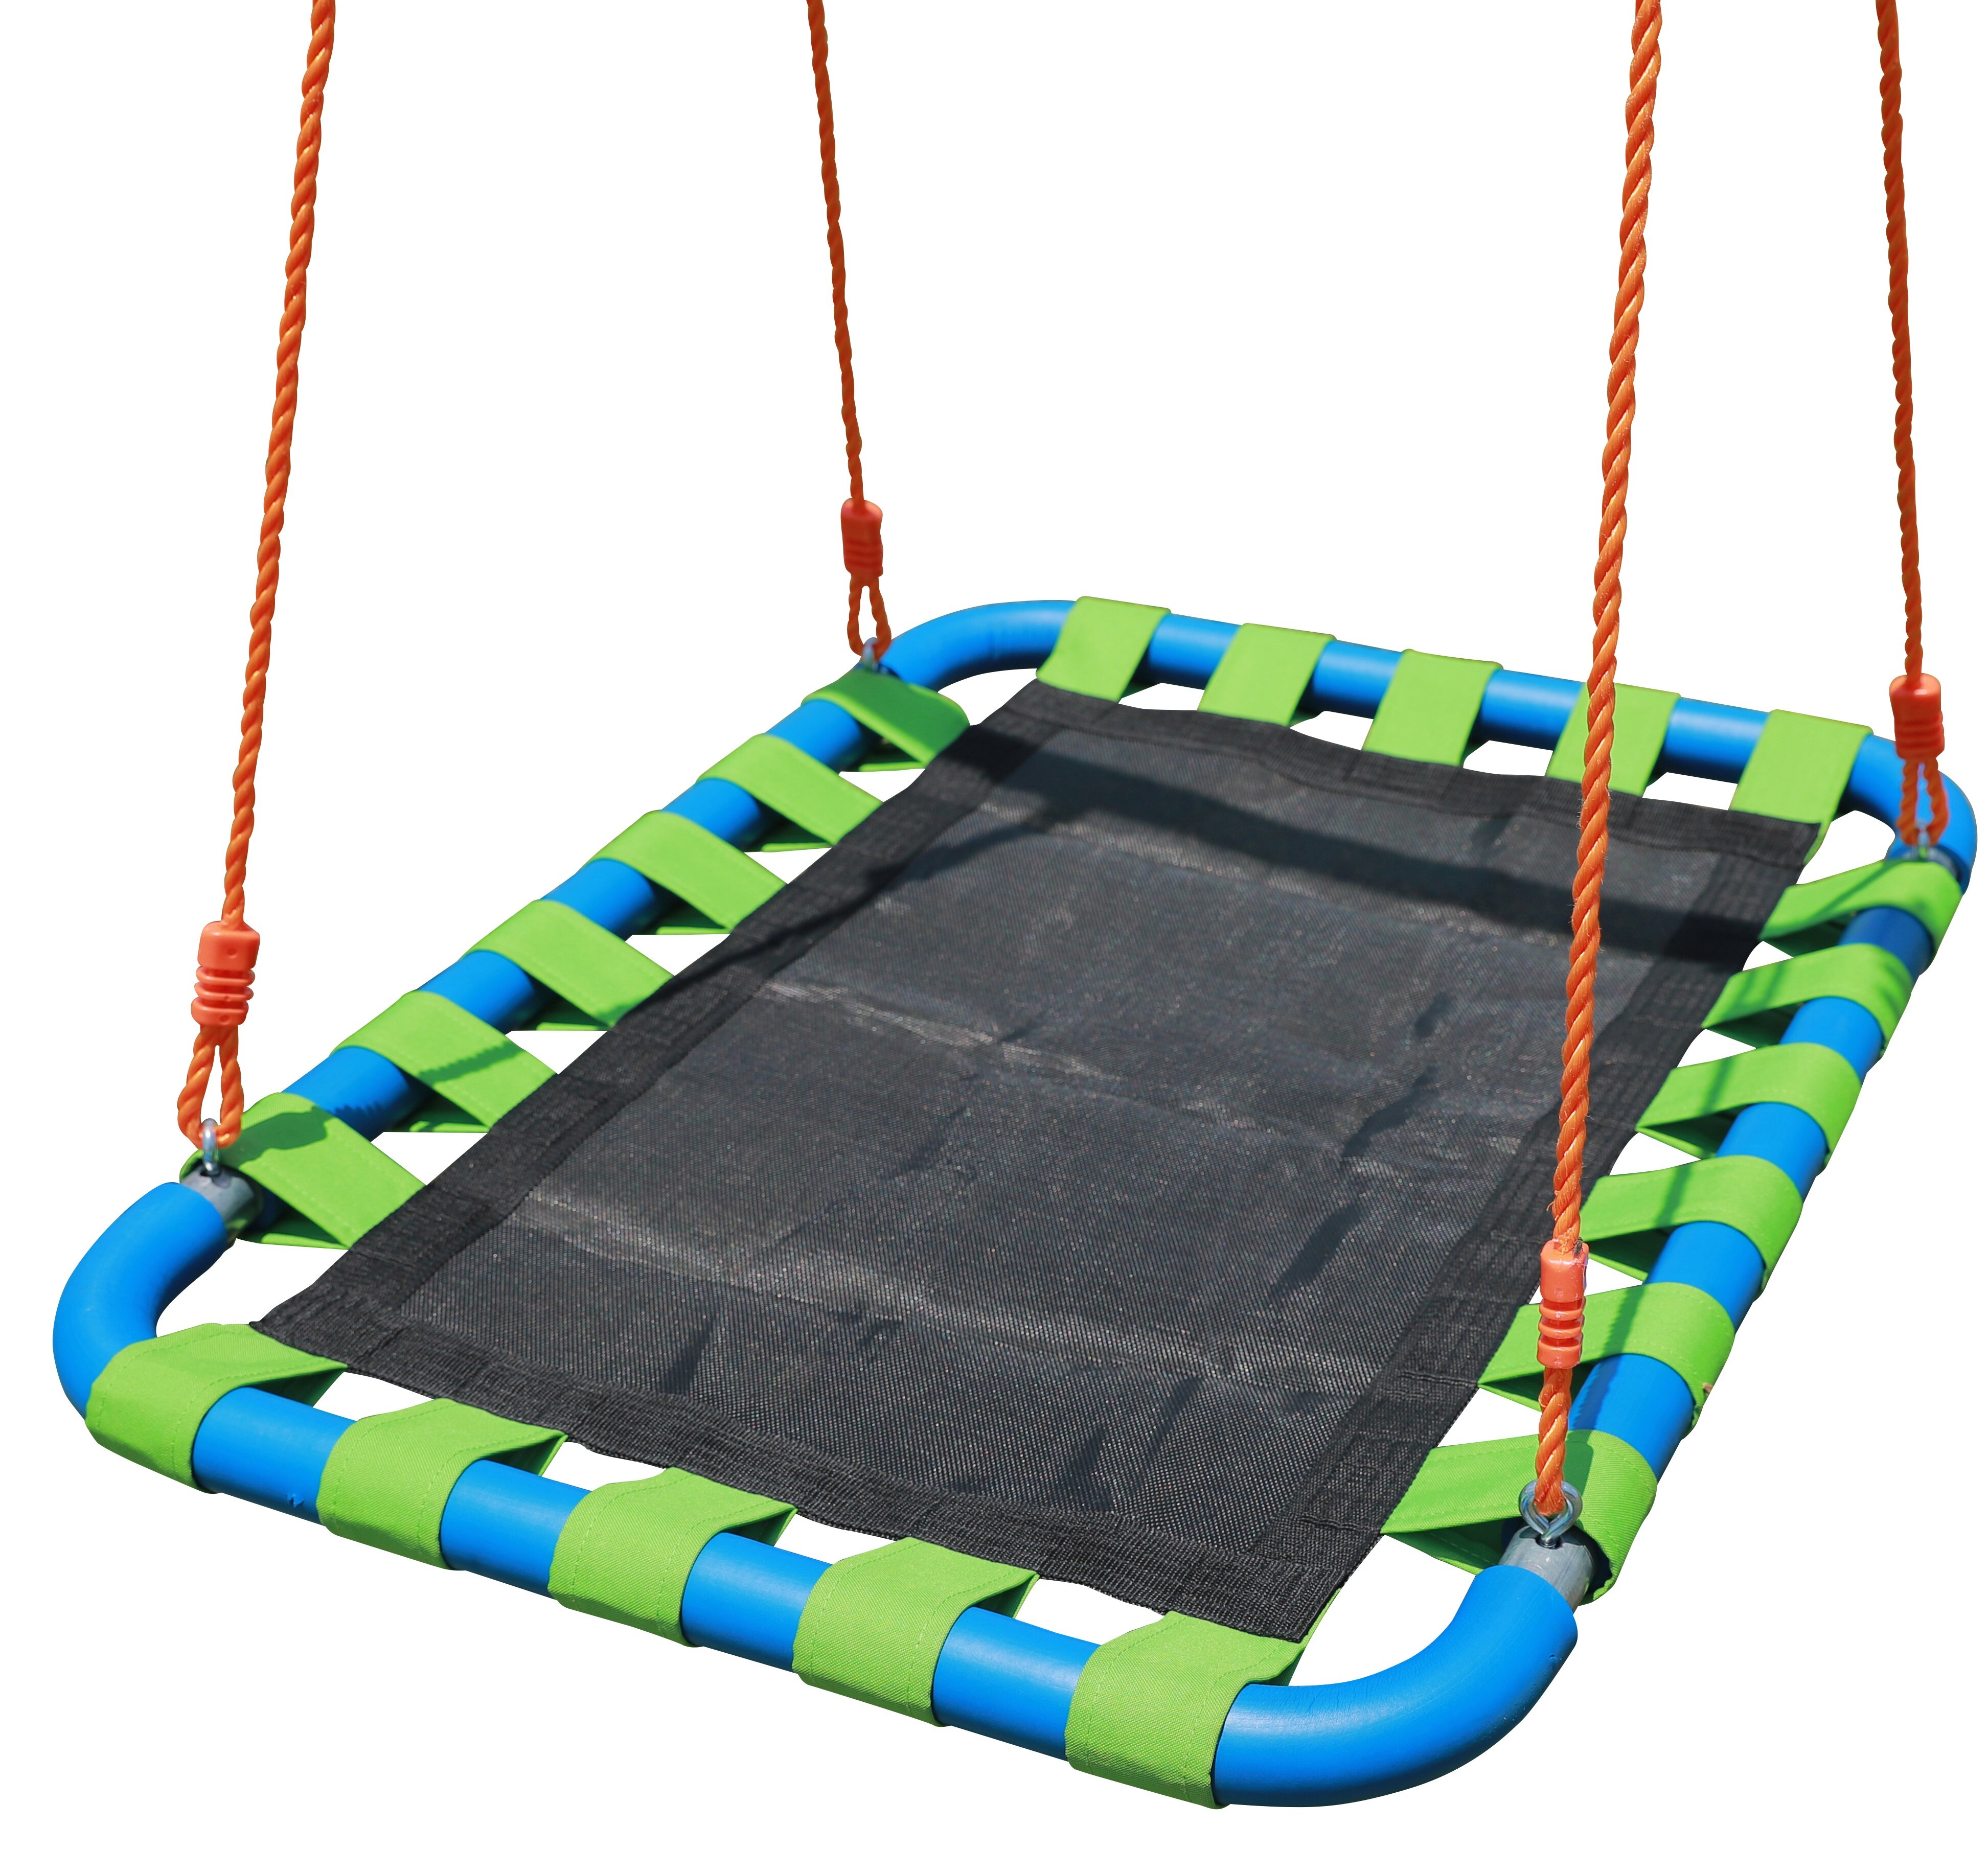 Kids Garden Swing Seat for Climbing MultiColor Mat W/ Height Adjustable Rope Set